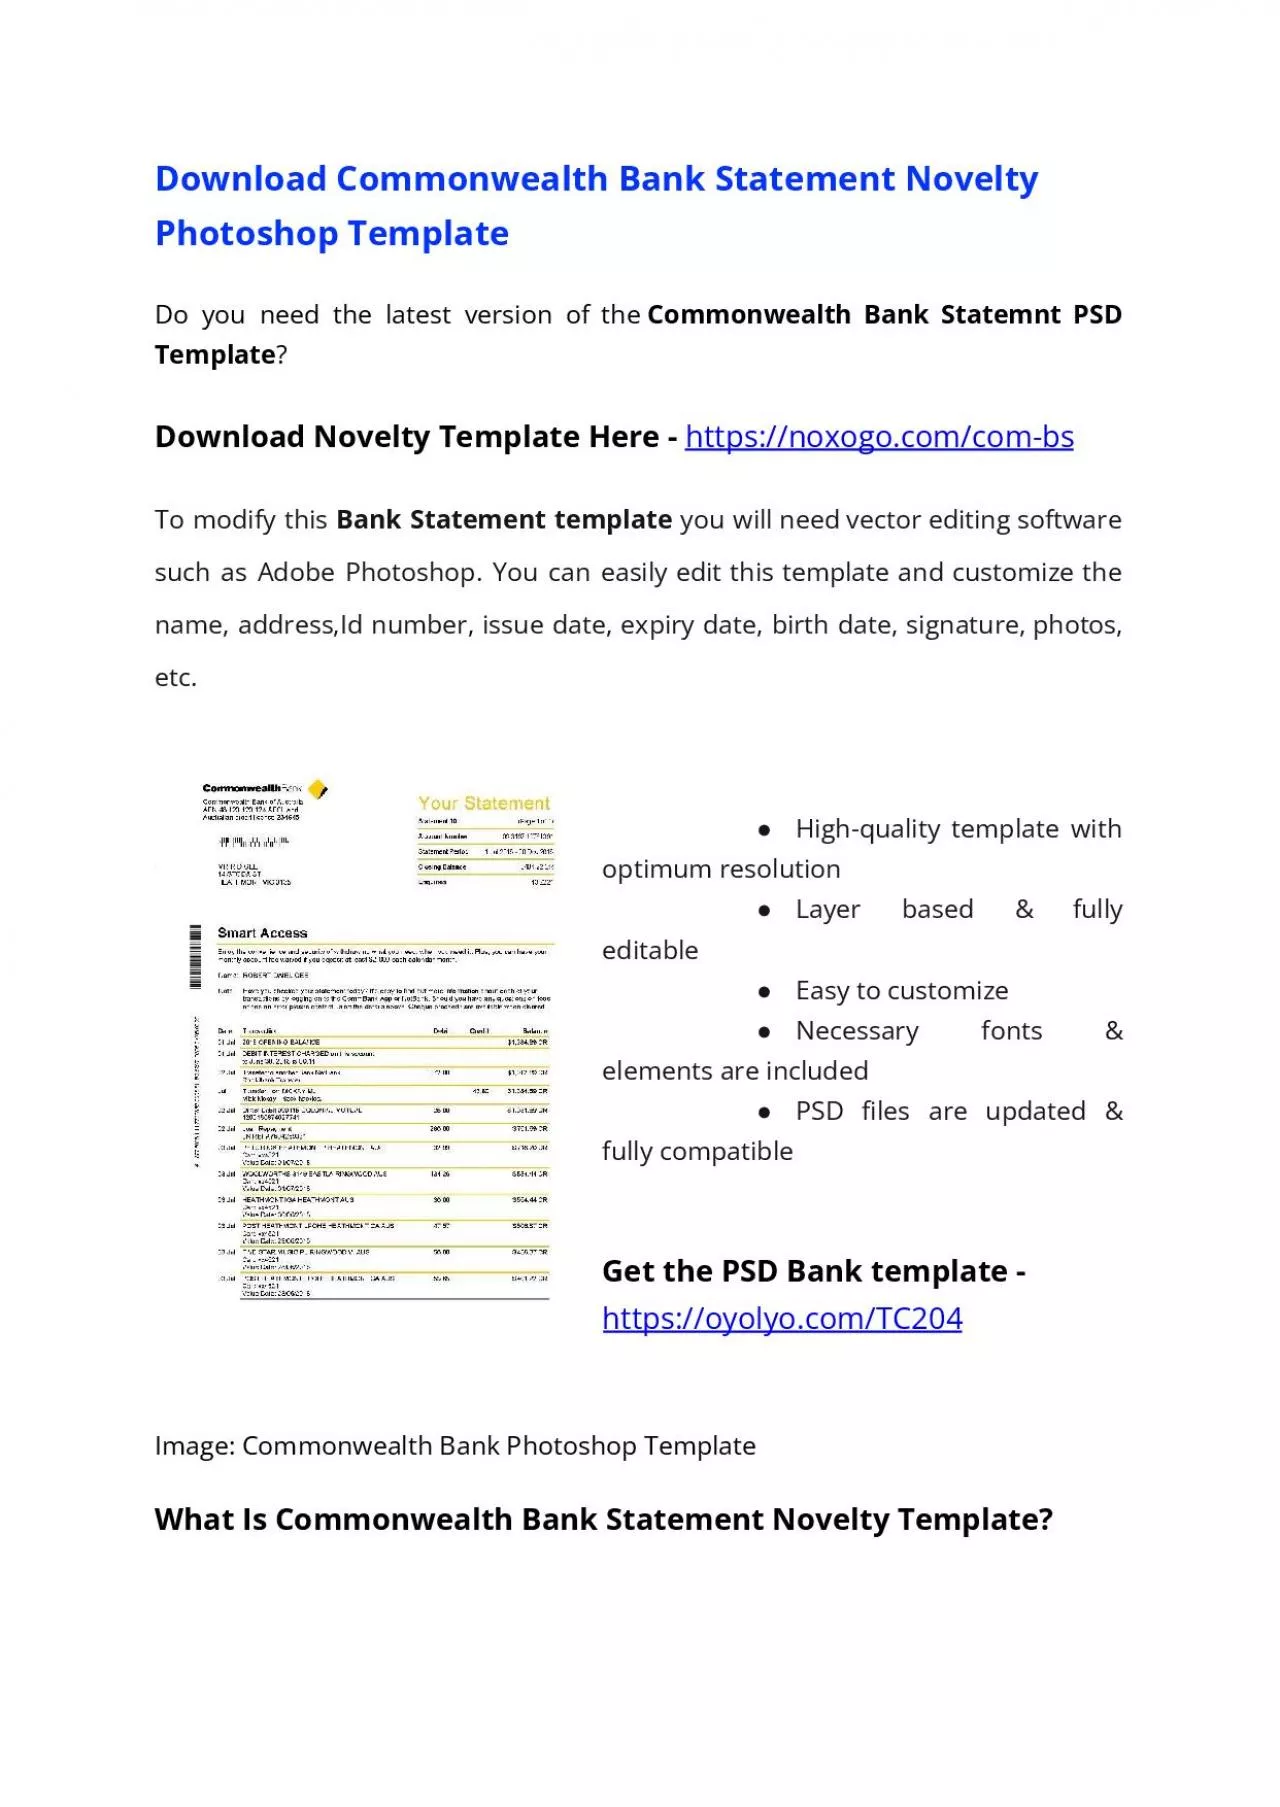 Commonwealth Bank Statement Template – Download MS Word File